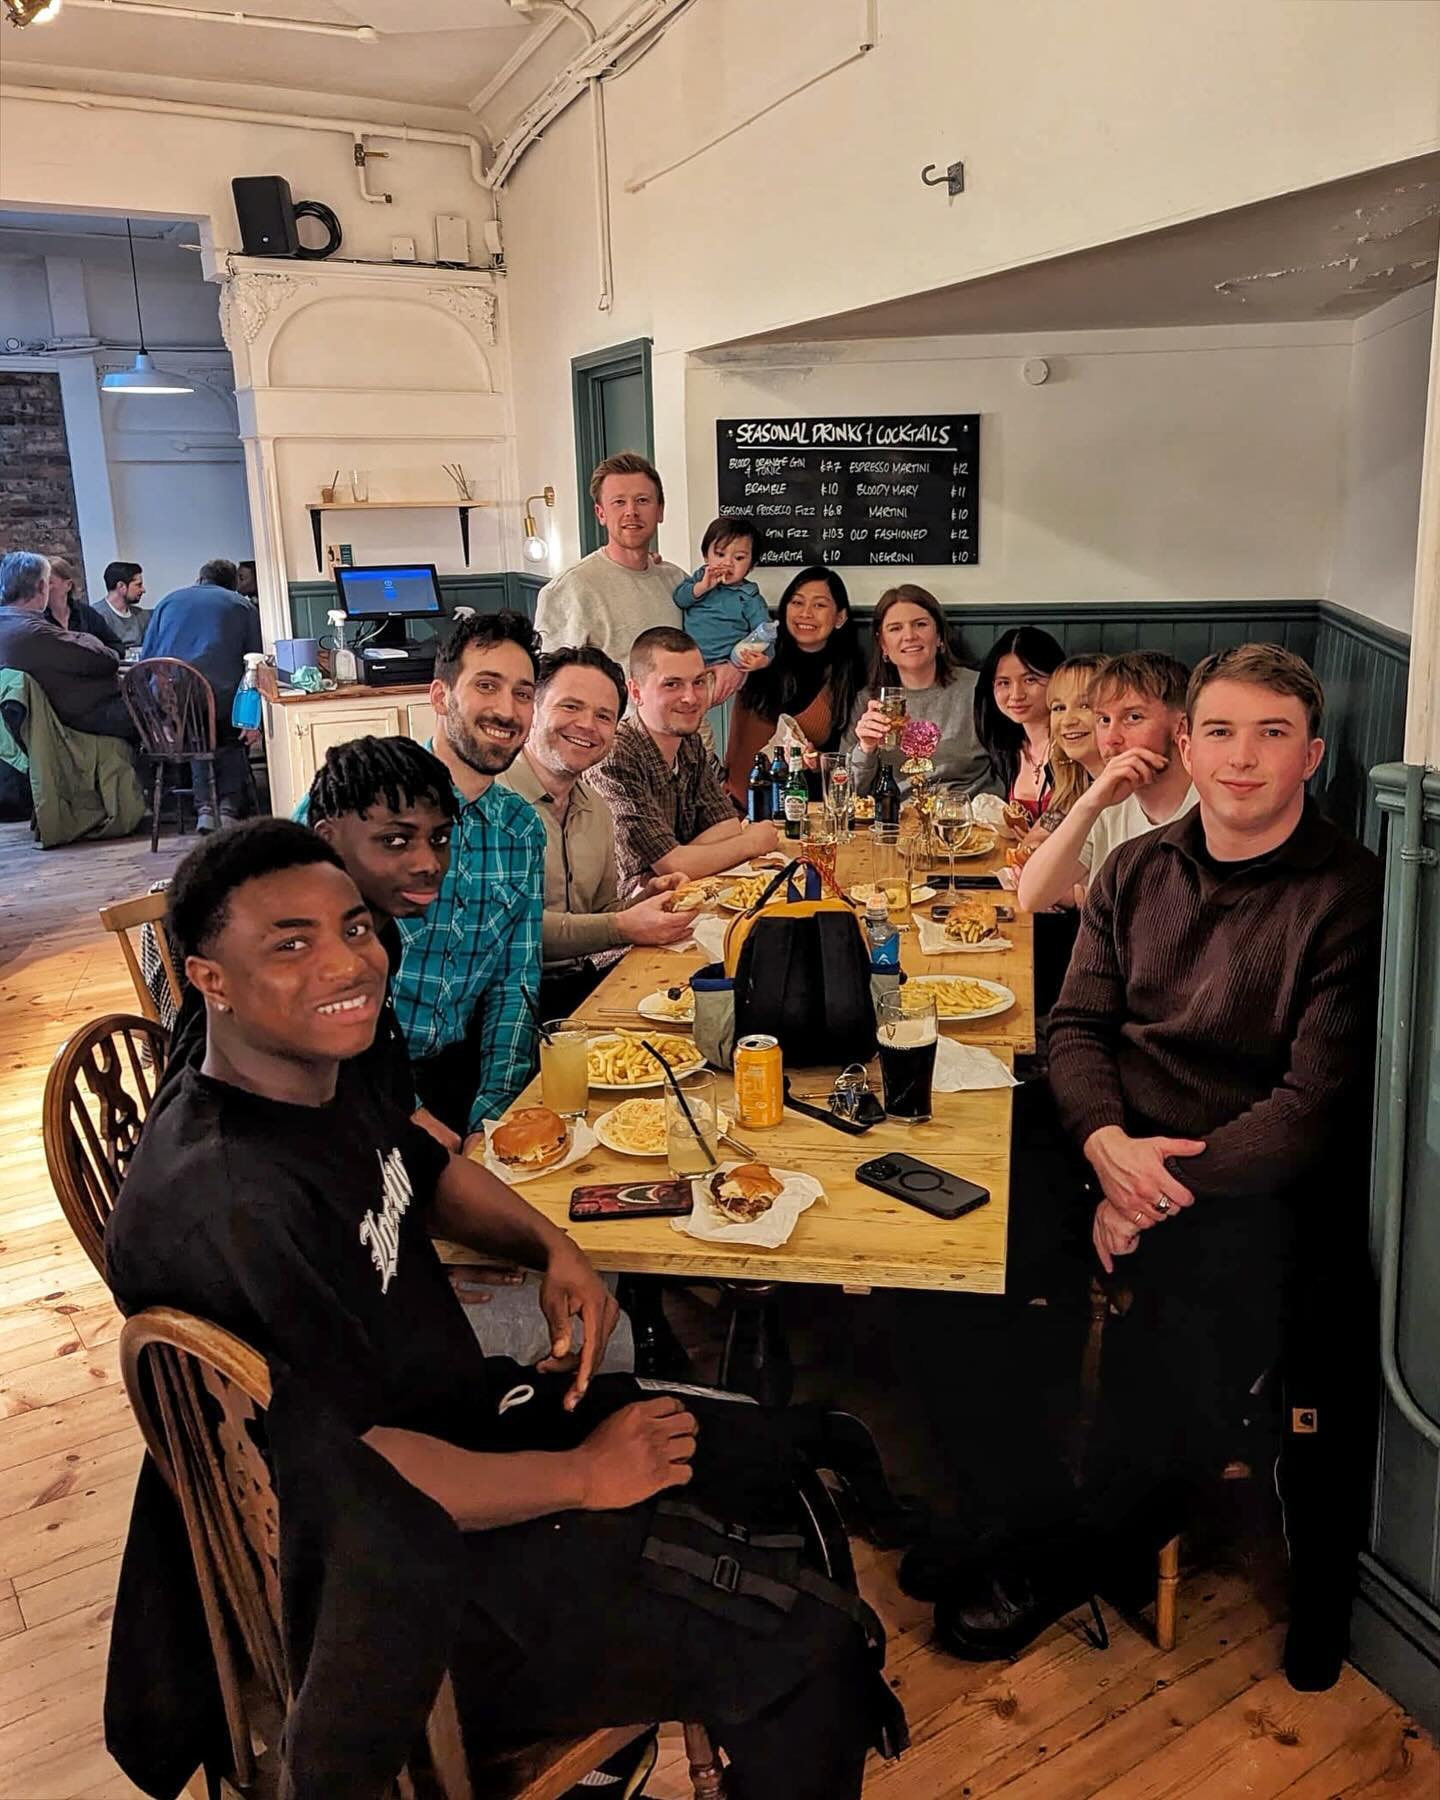 Taking advantage of a bank holiday Sunday with a team night out in Bristol to celebrate a year of Noah&rsquo;s! 

We couldn&rsquo;t have got through the last 12 months without this incredible team by our side. 

🔪 Want to join the family? We&rsquo;r